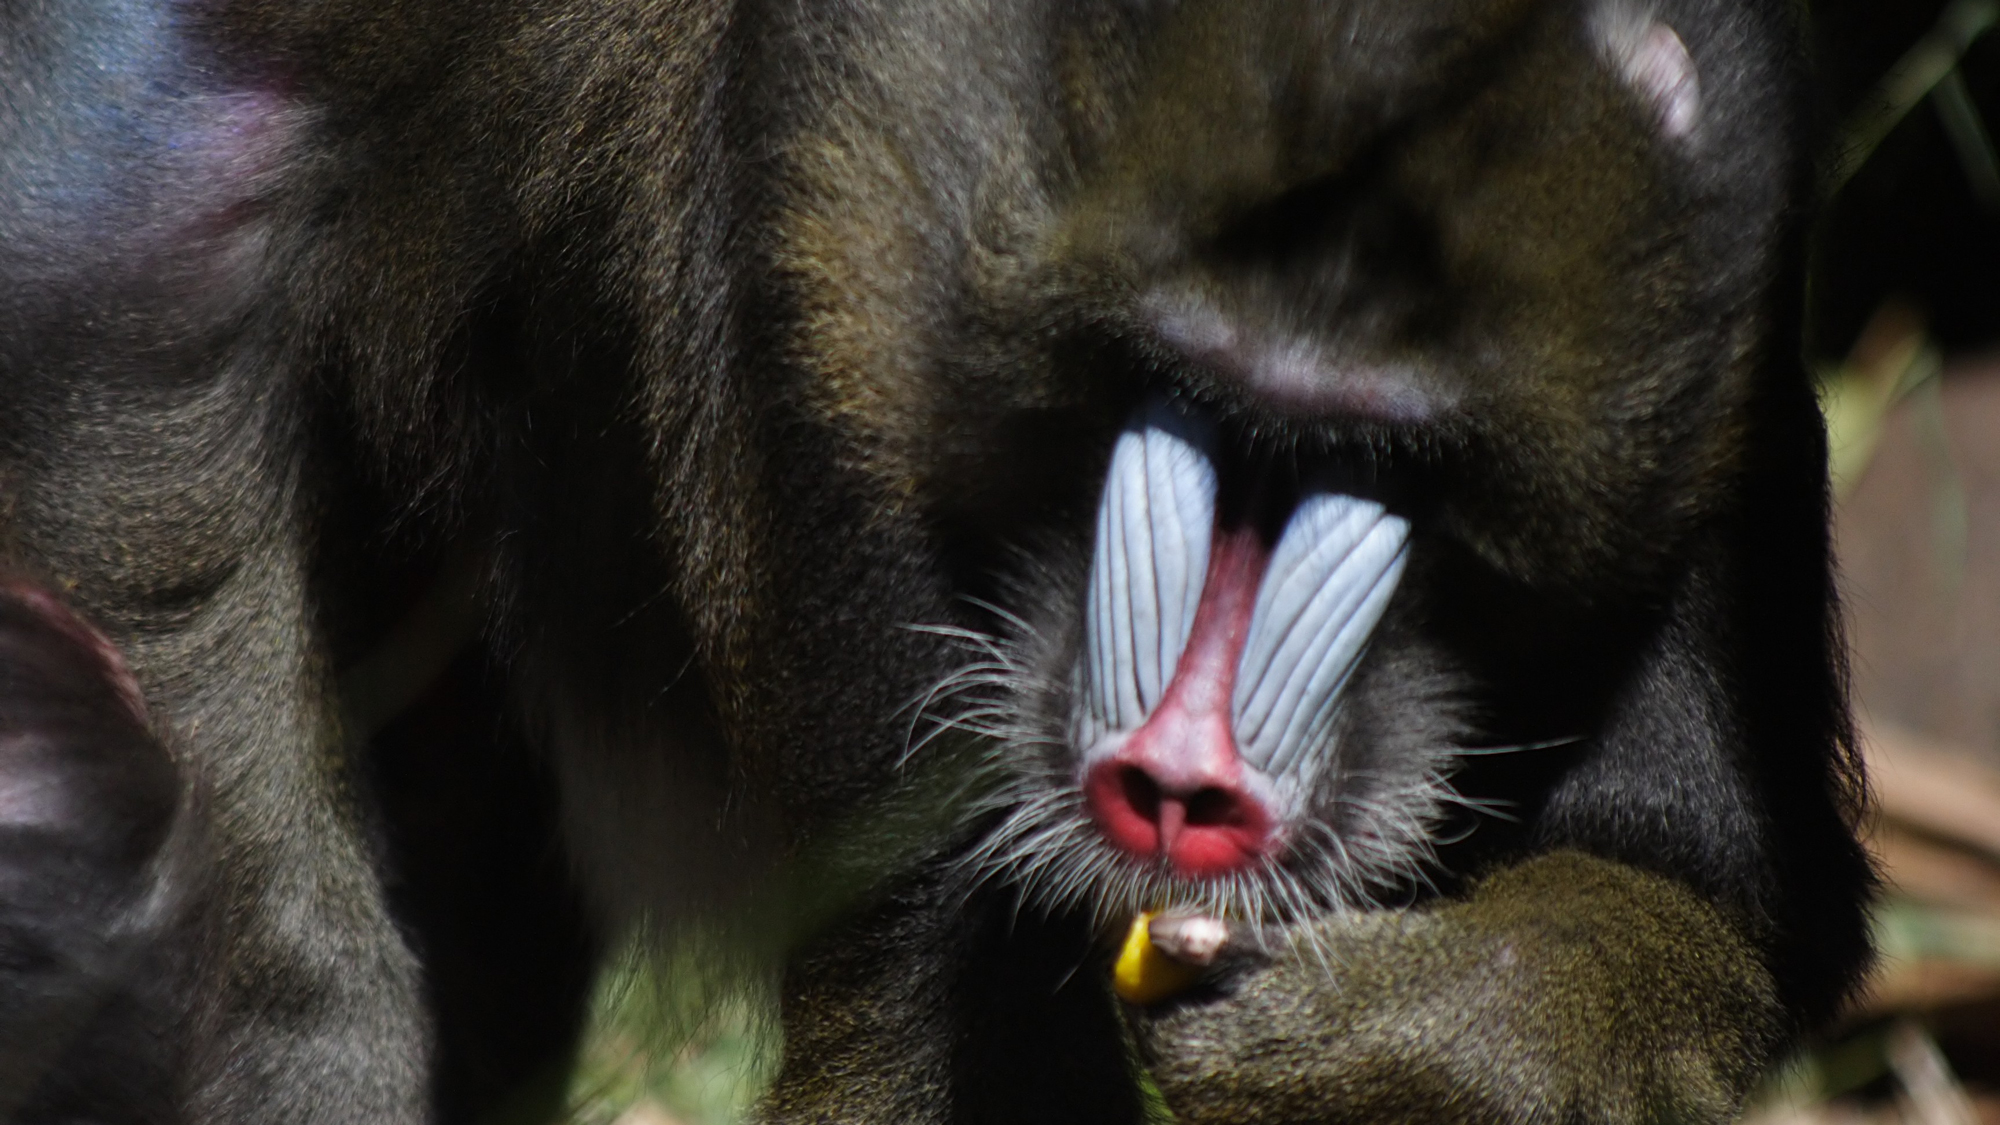 Male mandrill. Photo © Robert Parviainen/Flickr through a Creative Commons license